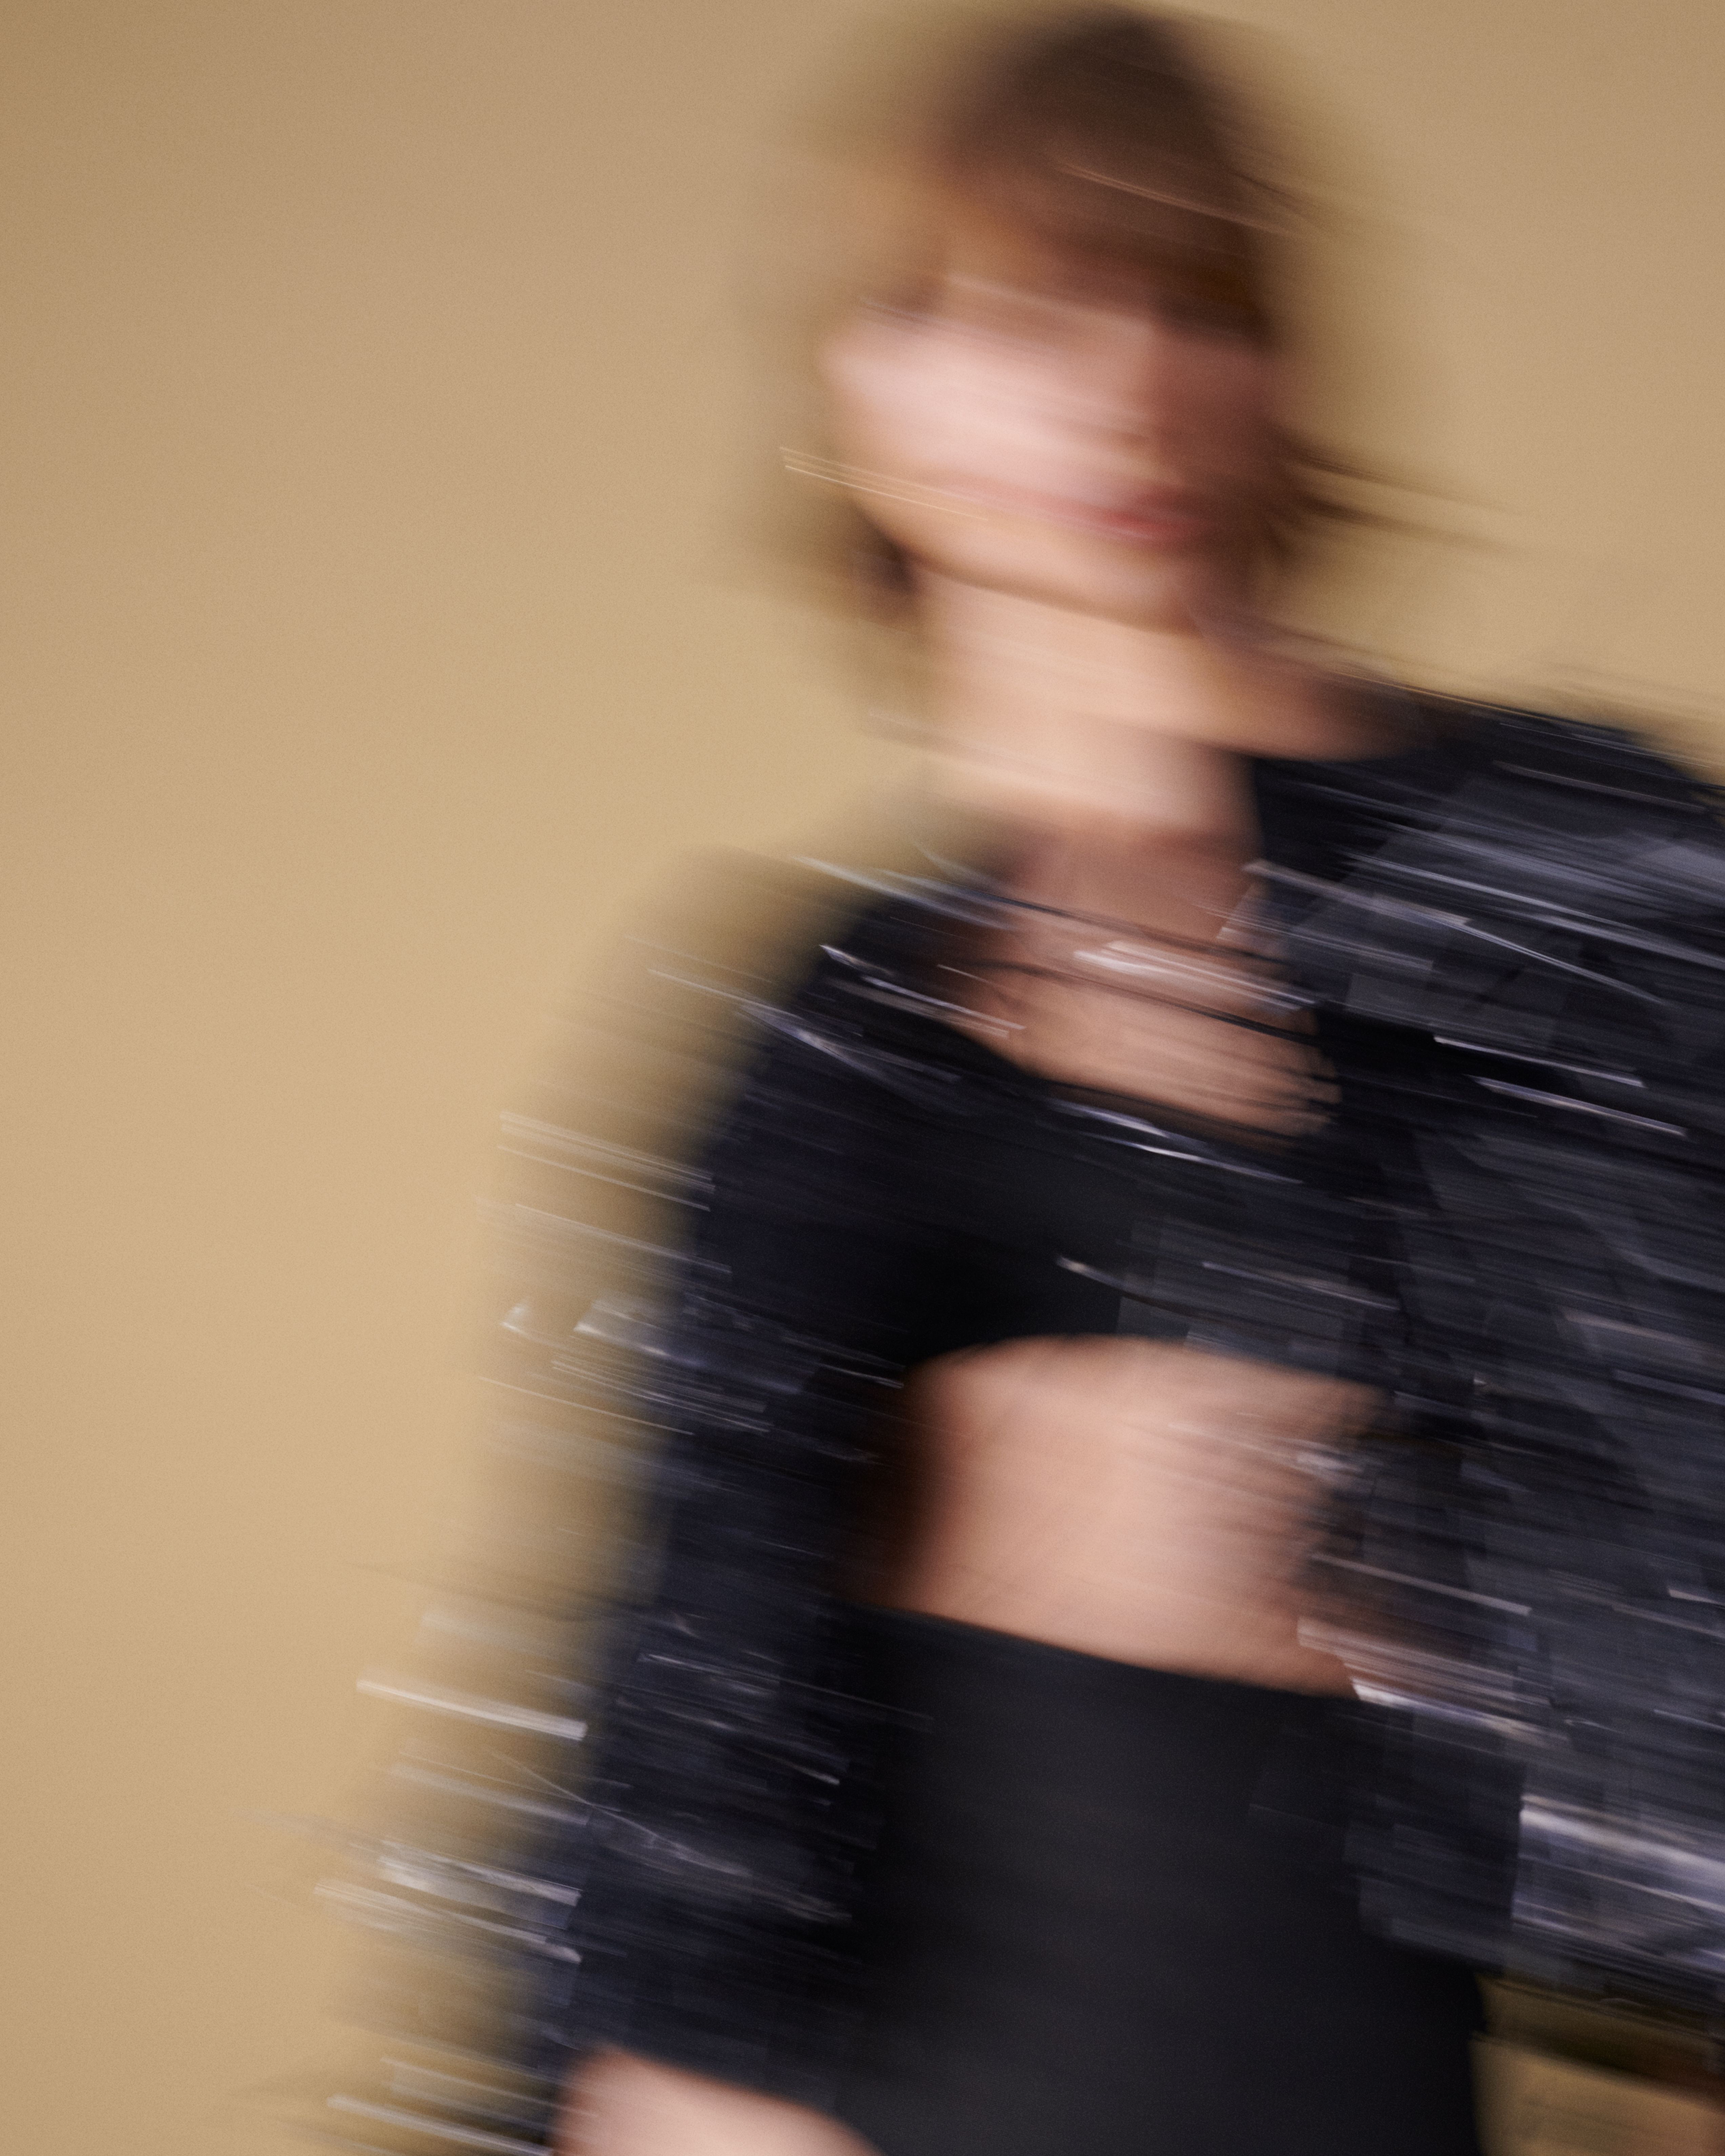 Blurred image of woman moving in a black tinsel fringed jacket, black bralette and underwear